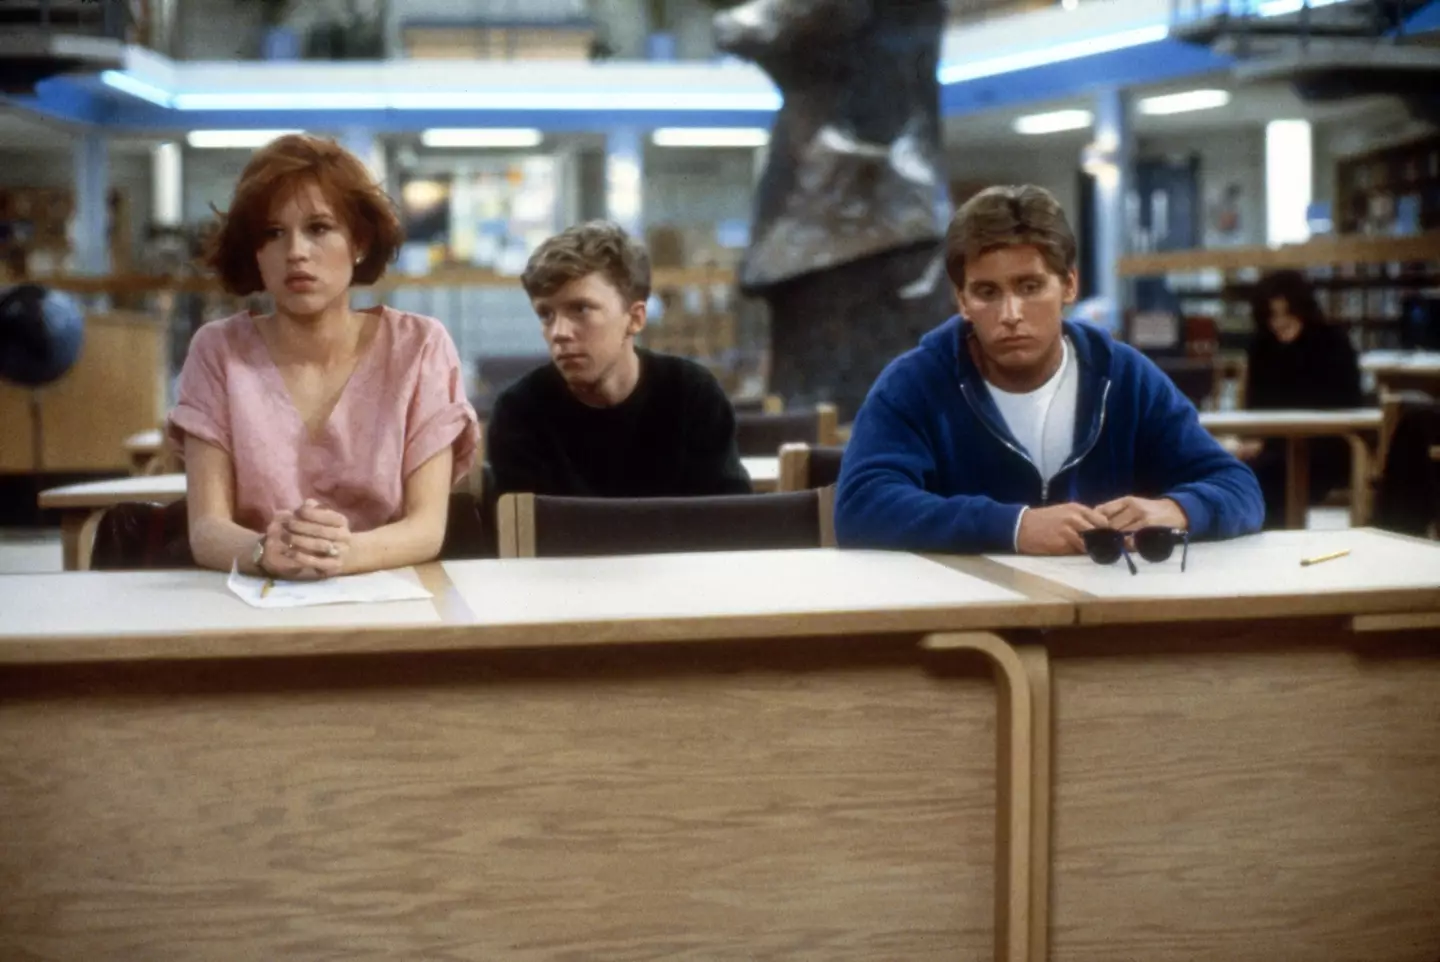 Pupils at the school can get weekend detention, like in The Breakfast Club.